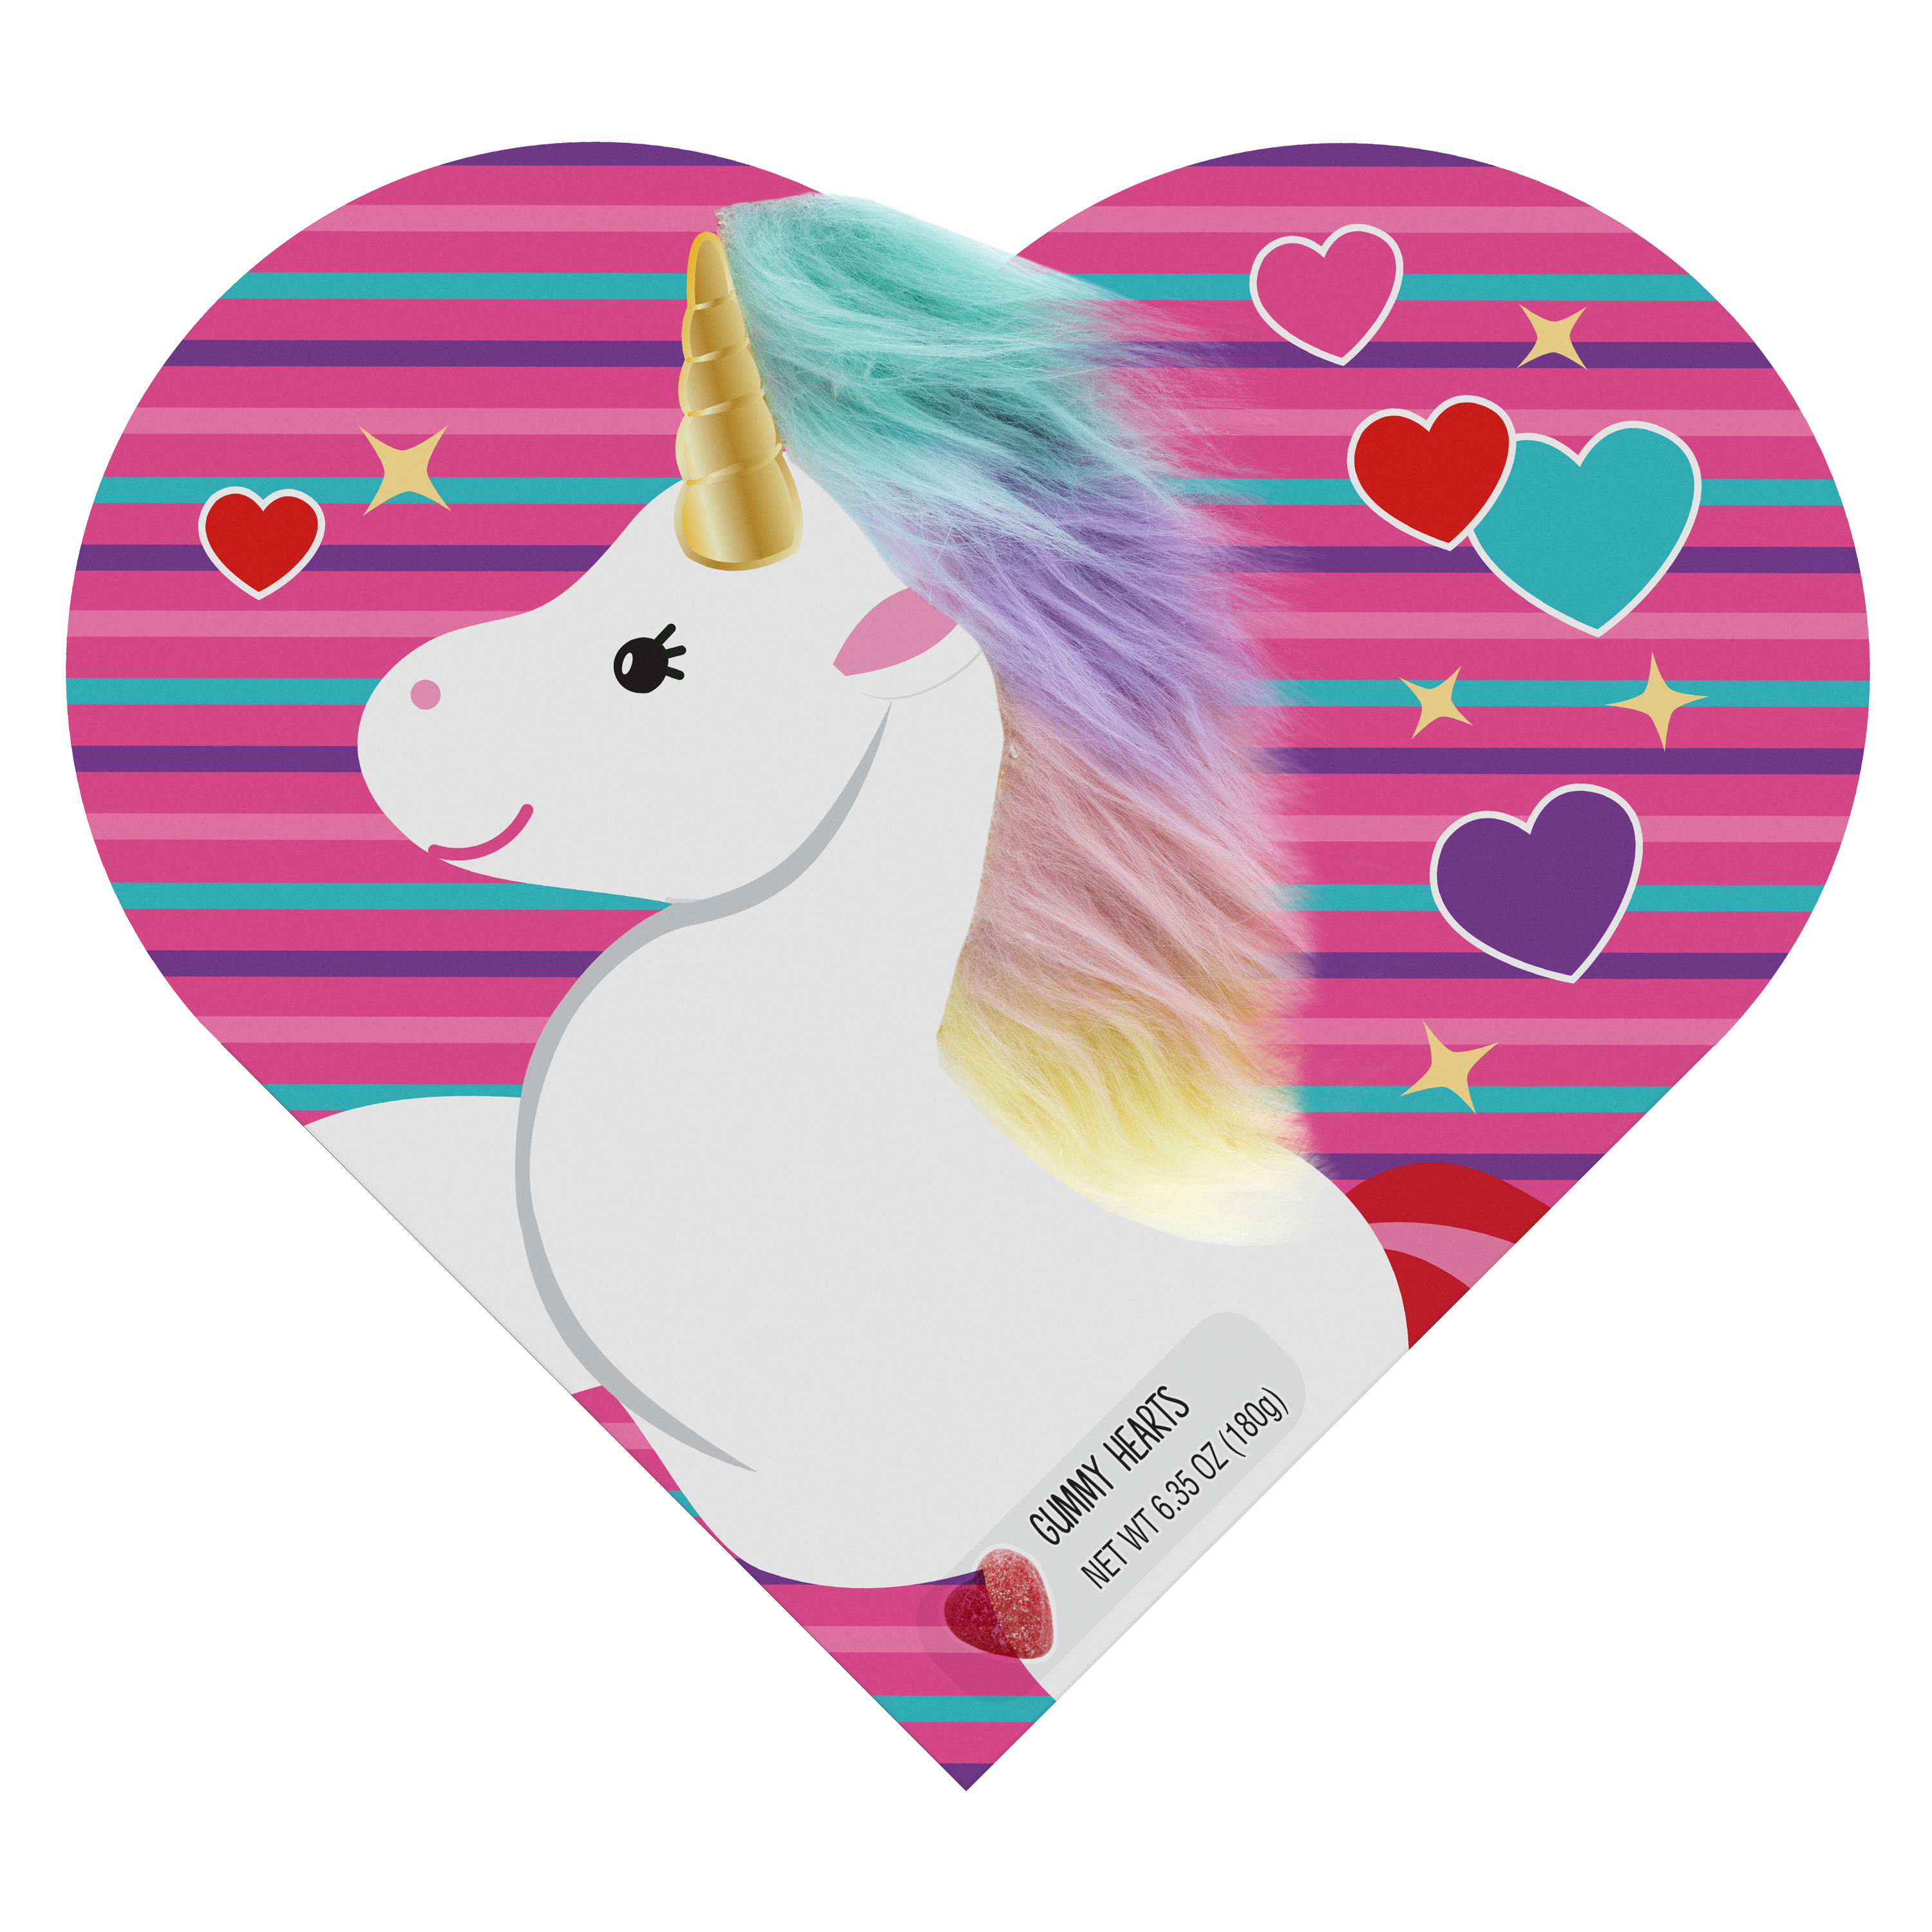 Galerie Unicorn Faux Heart Box with Gummies, 6.35 oz - image 1 of 6